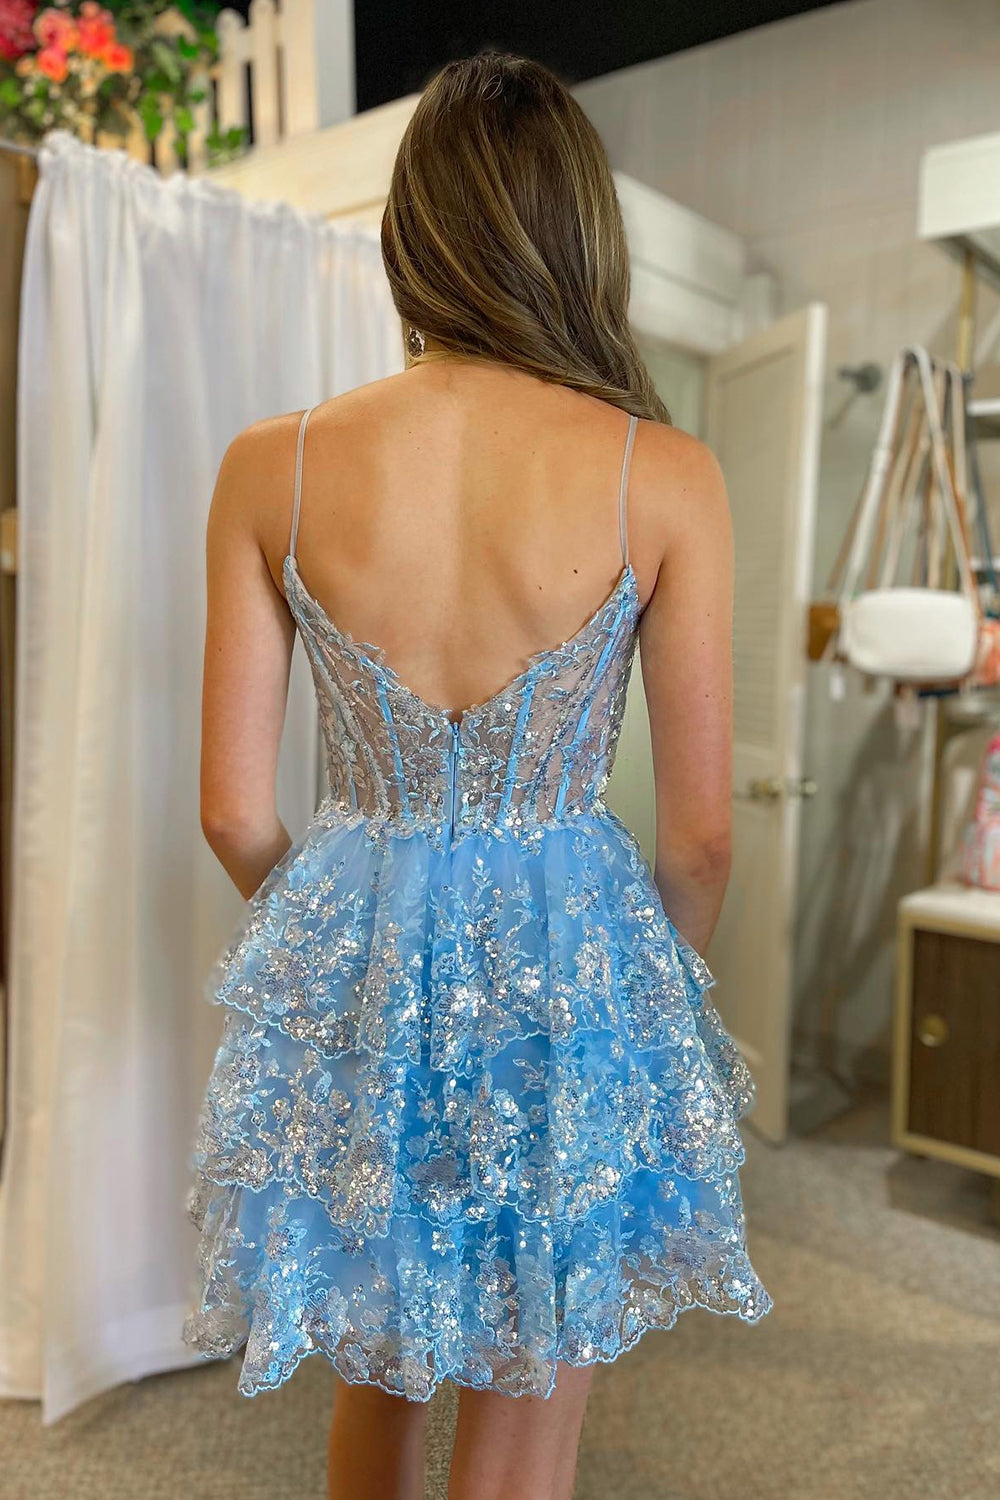 Sparkly Blue Corset Top Spaghetti Straps A-Line Lace Short Homecoming Dress